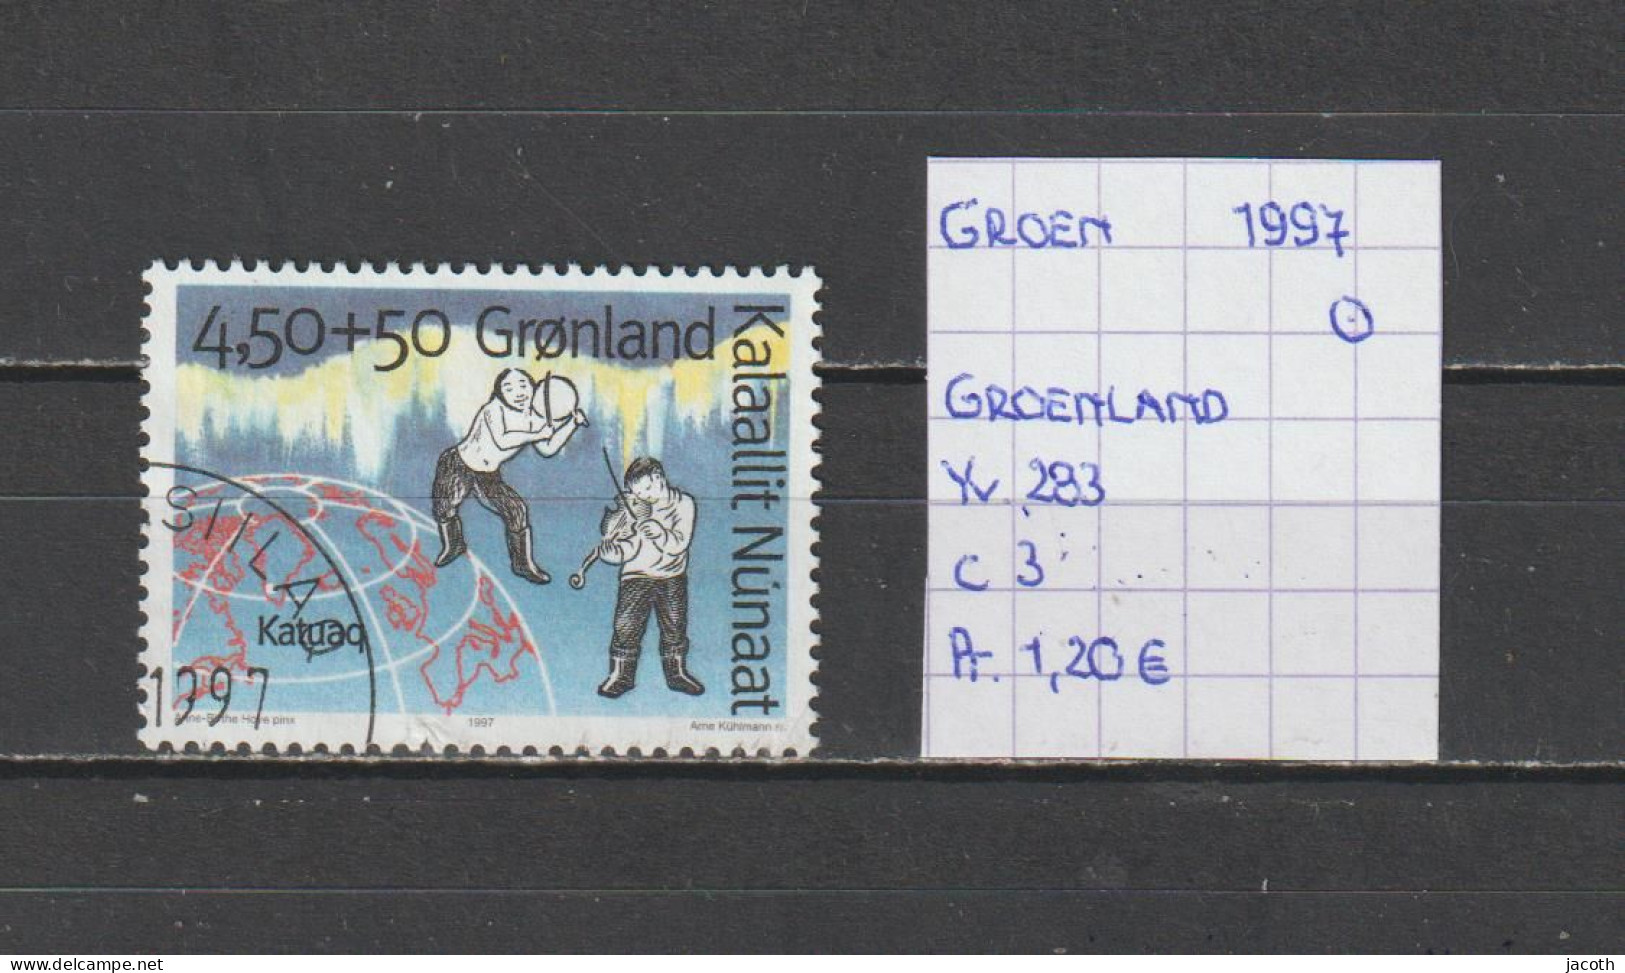 (TJ) Groenland 1997 - YT 283 (gest./obl./used) - Used Stamps